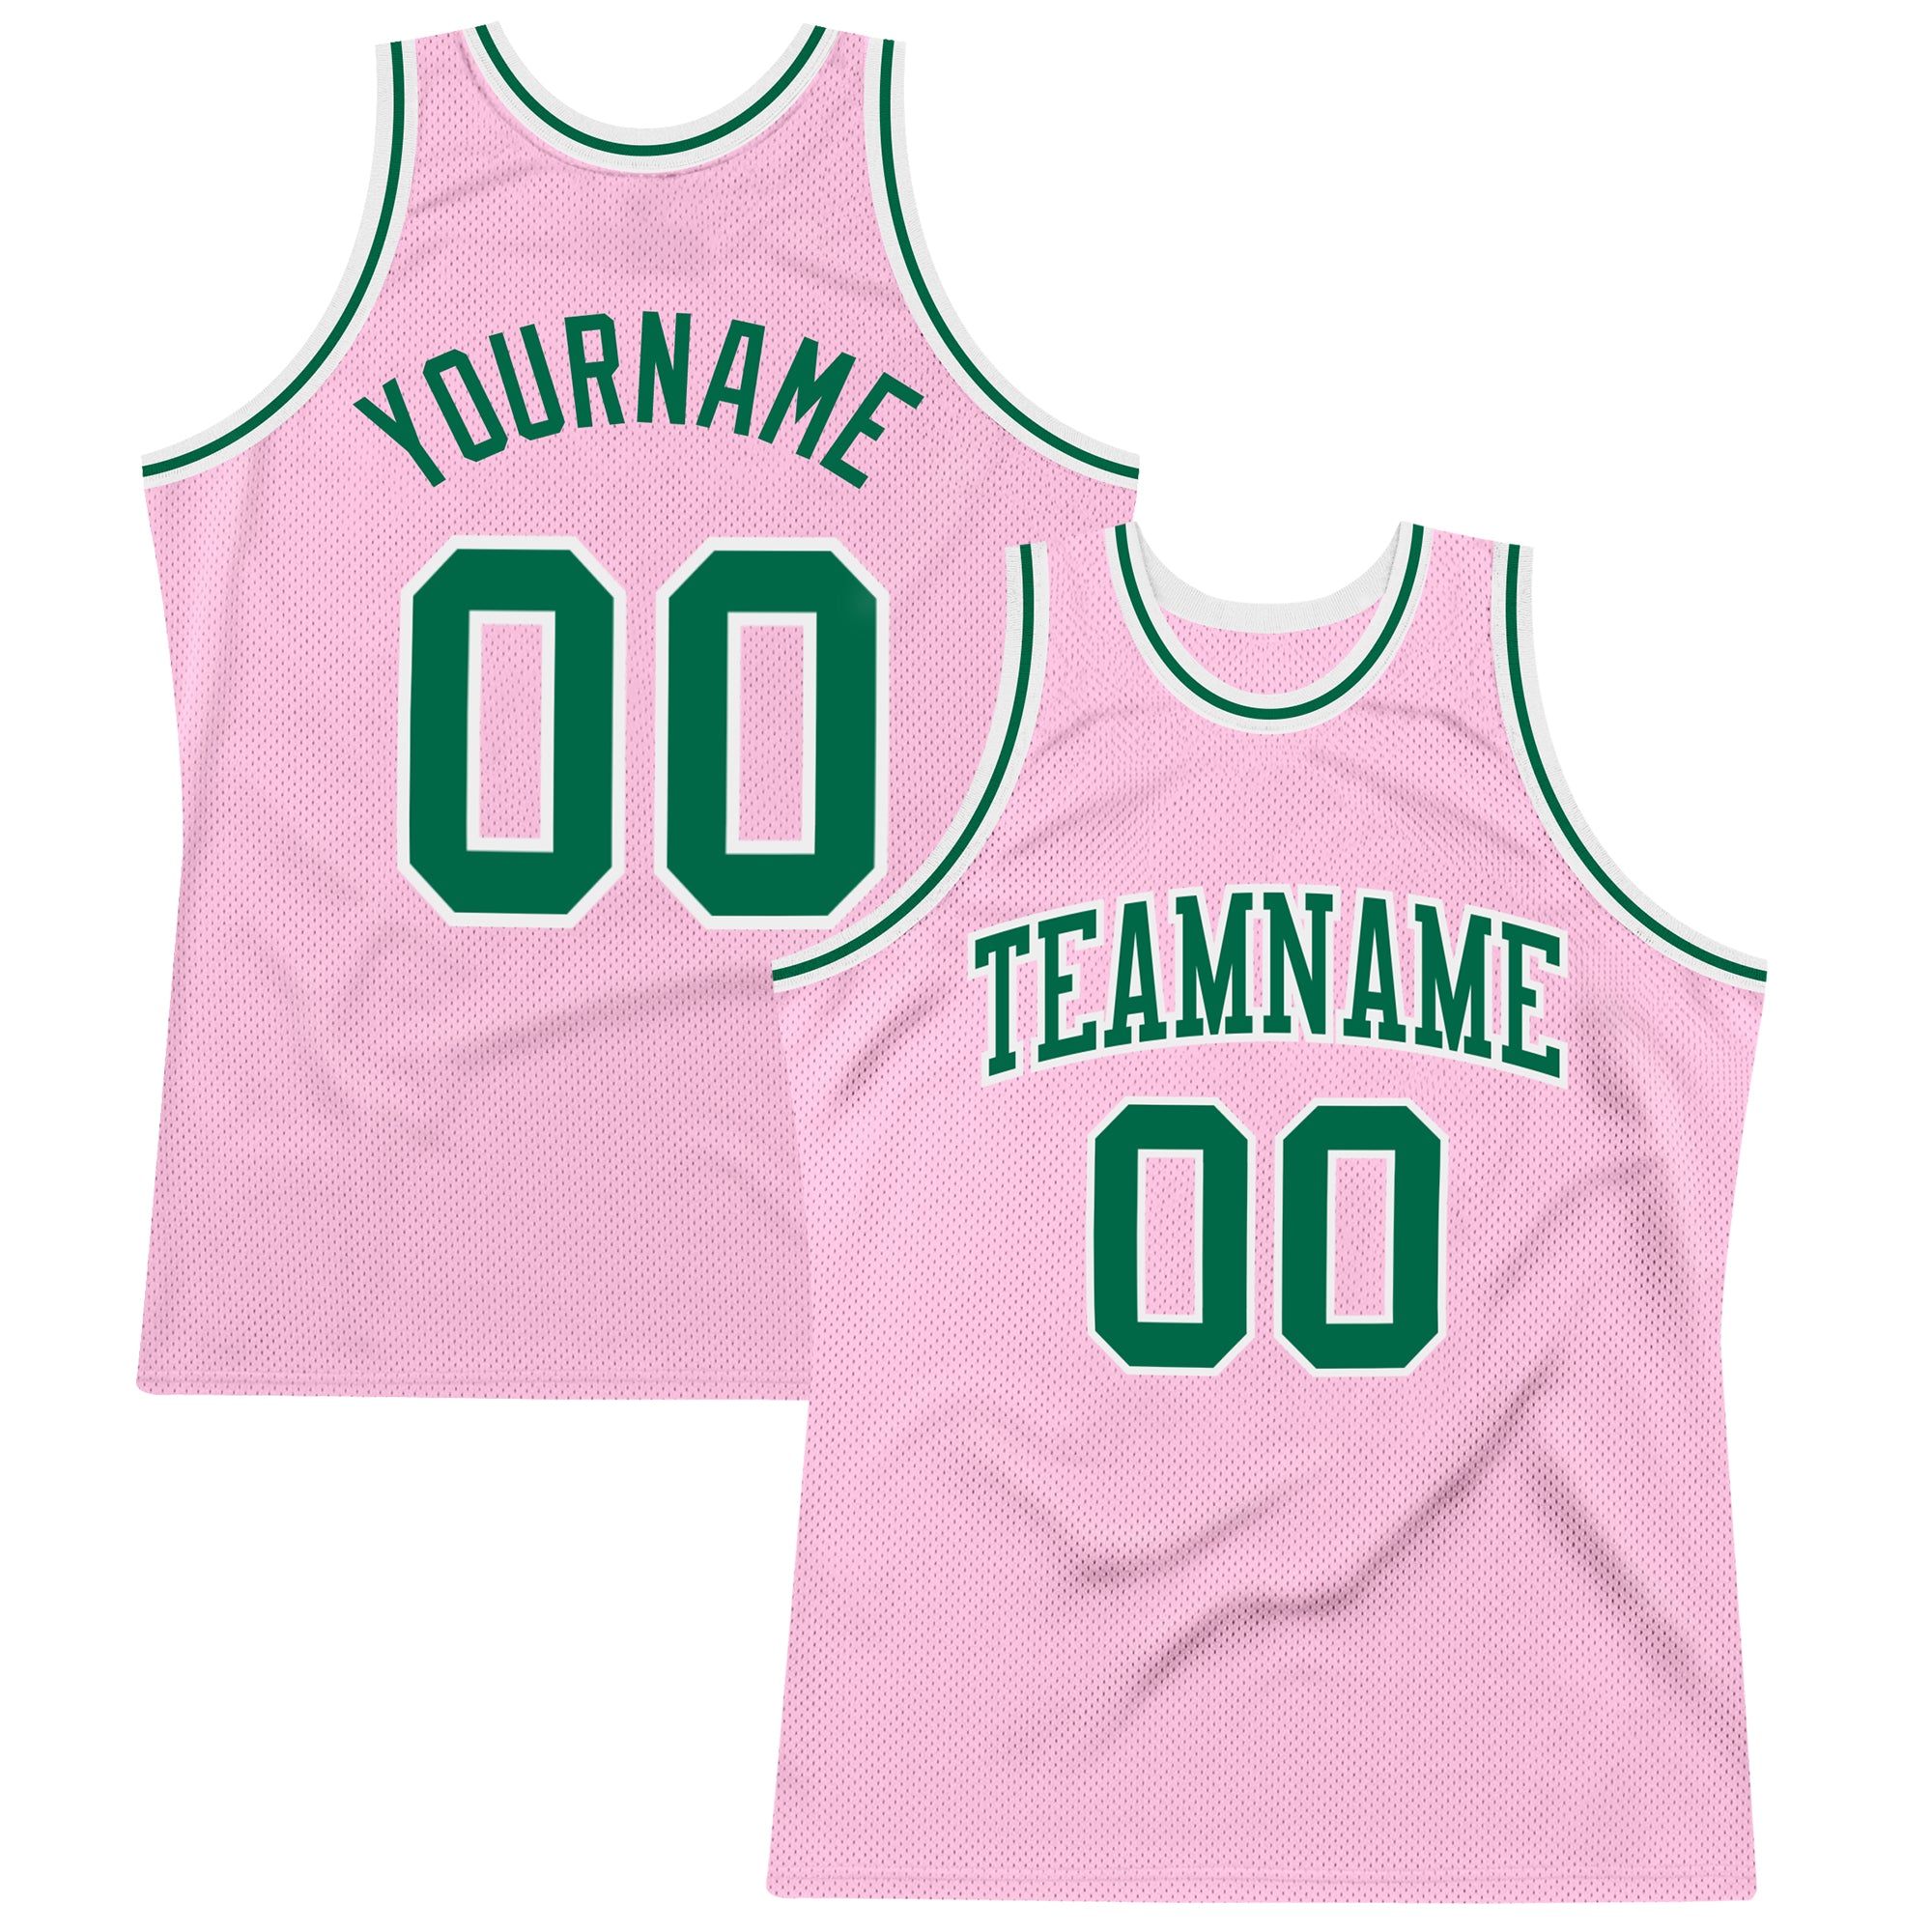 color basketball jersey design green and white